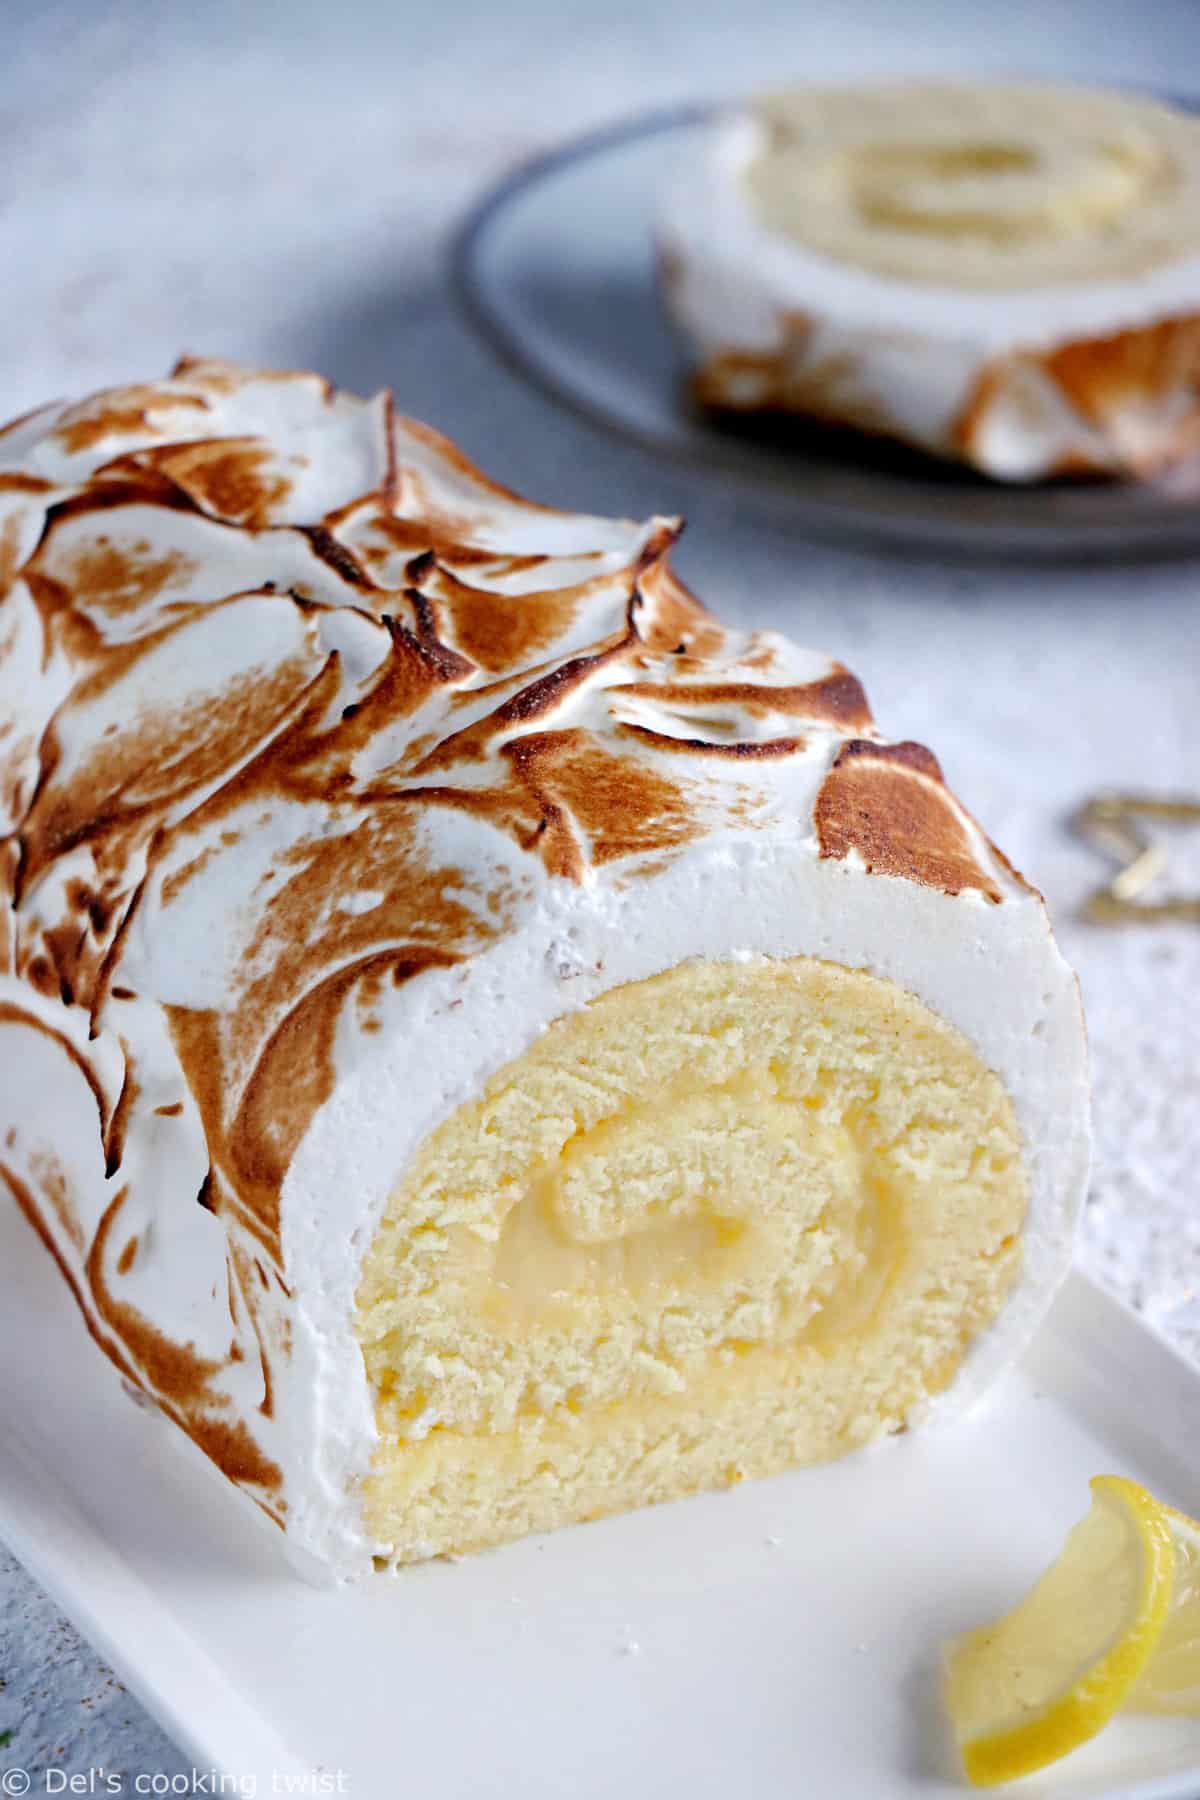 Lemon Meringue Roulade or cake roll consists of a supremely moist sponge cake filled with homemade lemon curd and covered with swirls of torched meringue.